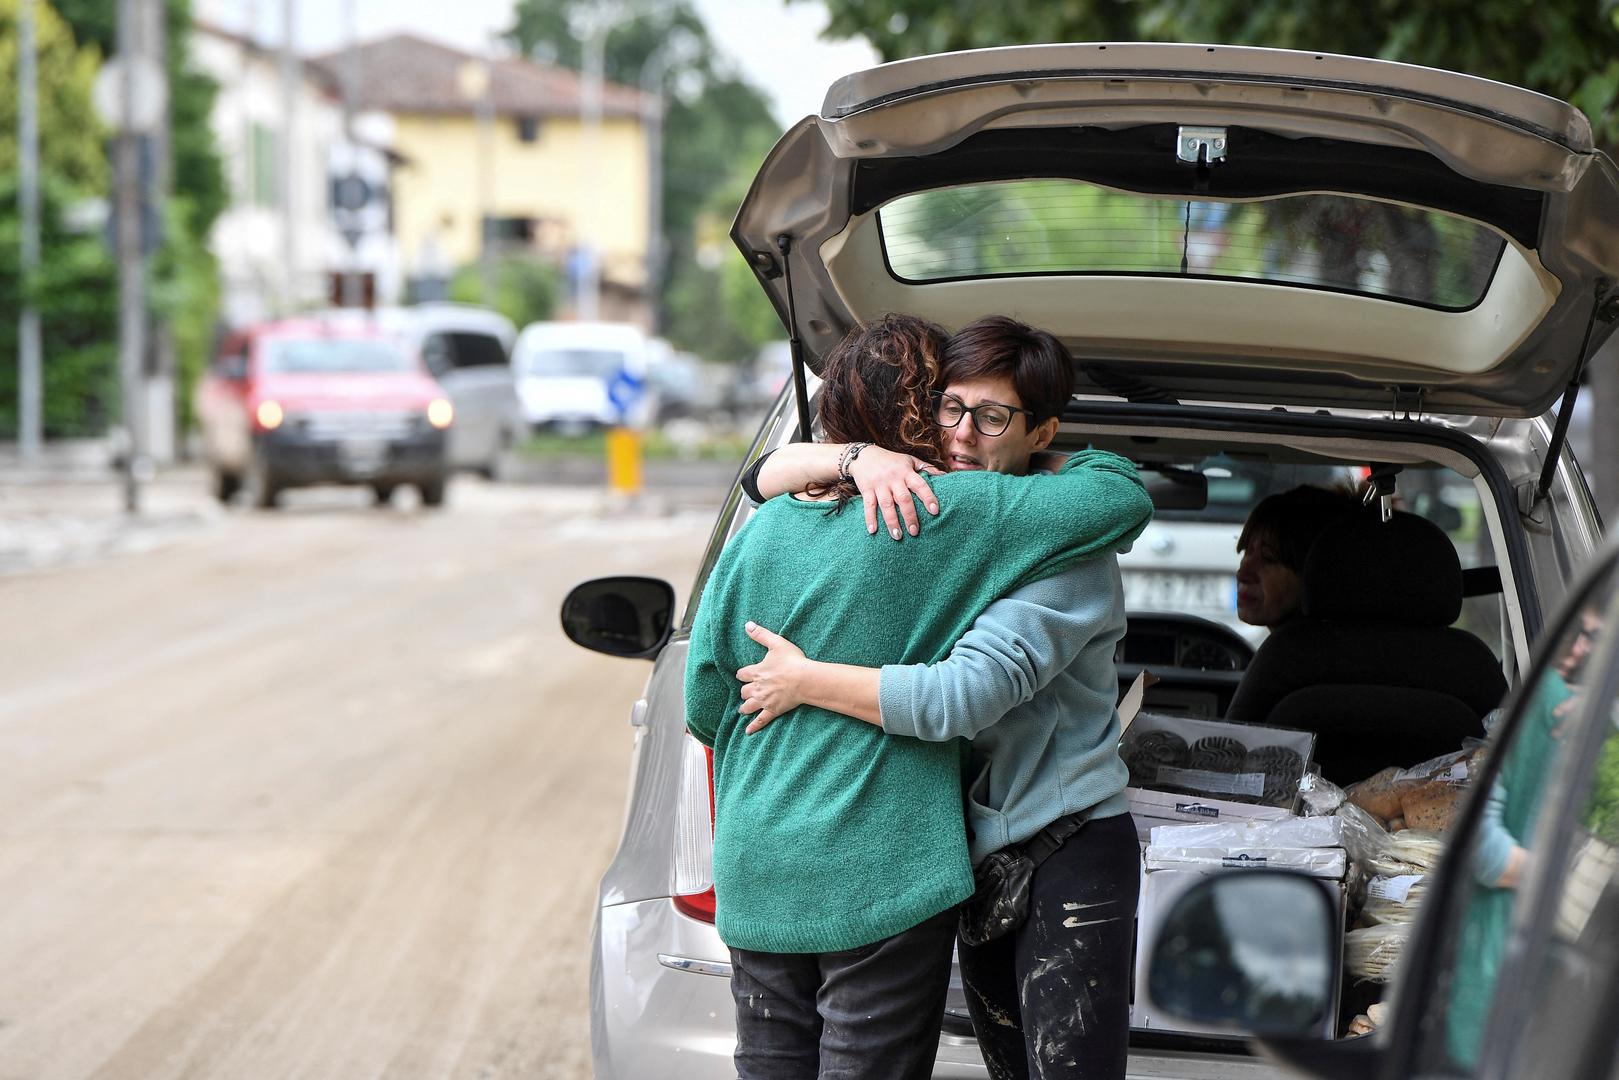 People embrace next to a car, after heavy rains hit Italy's Emilia Romagna region, in Castel Bolognese, Italy, May 18, 2023. REUTERS/Jennifer Lorenzini Photo: JENNIFER LORENZINI/REUTERS